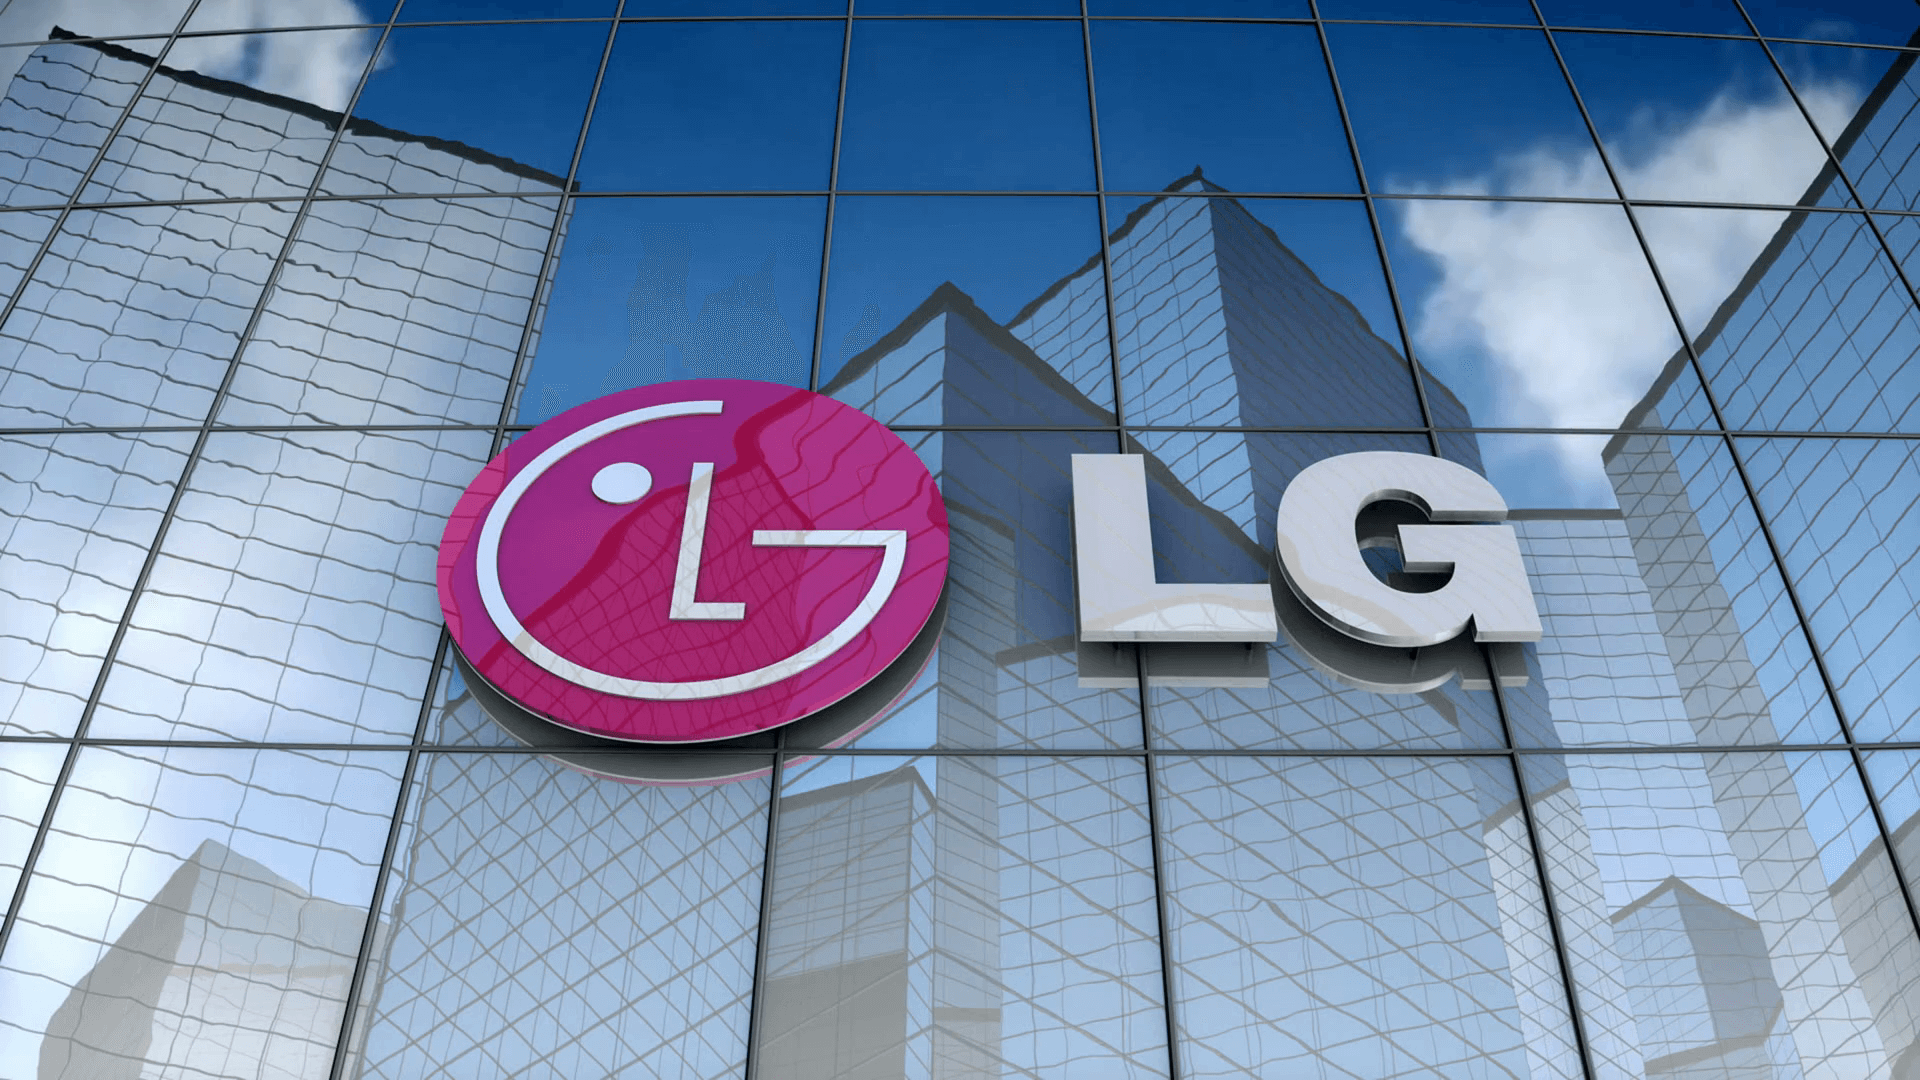 LG's exit from smartphone business looks increasingly likely after buyers pull out